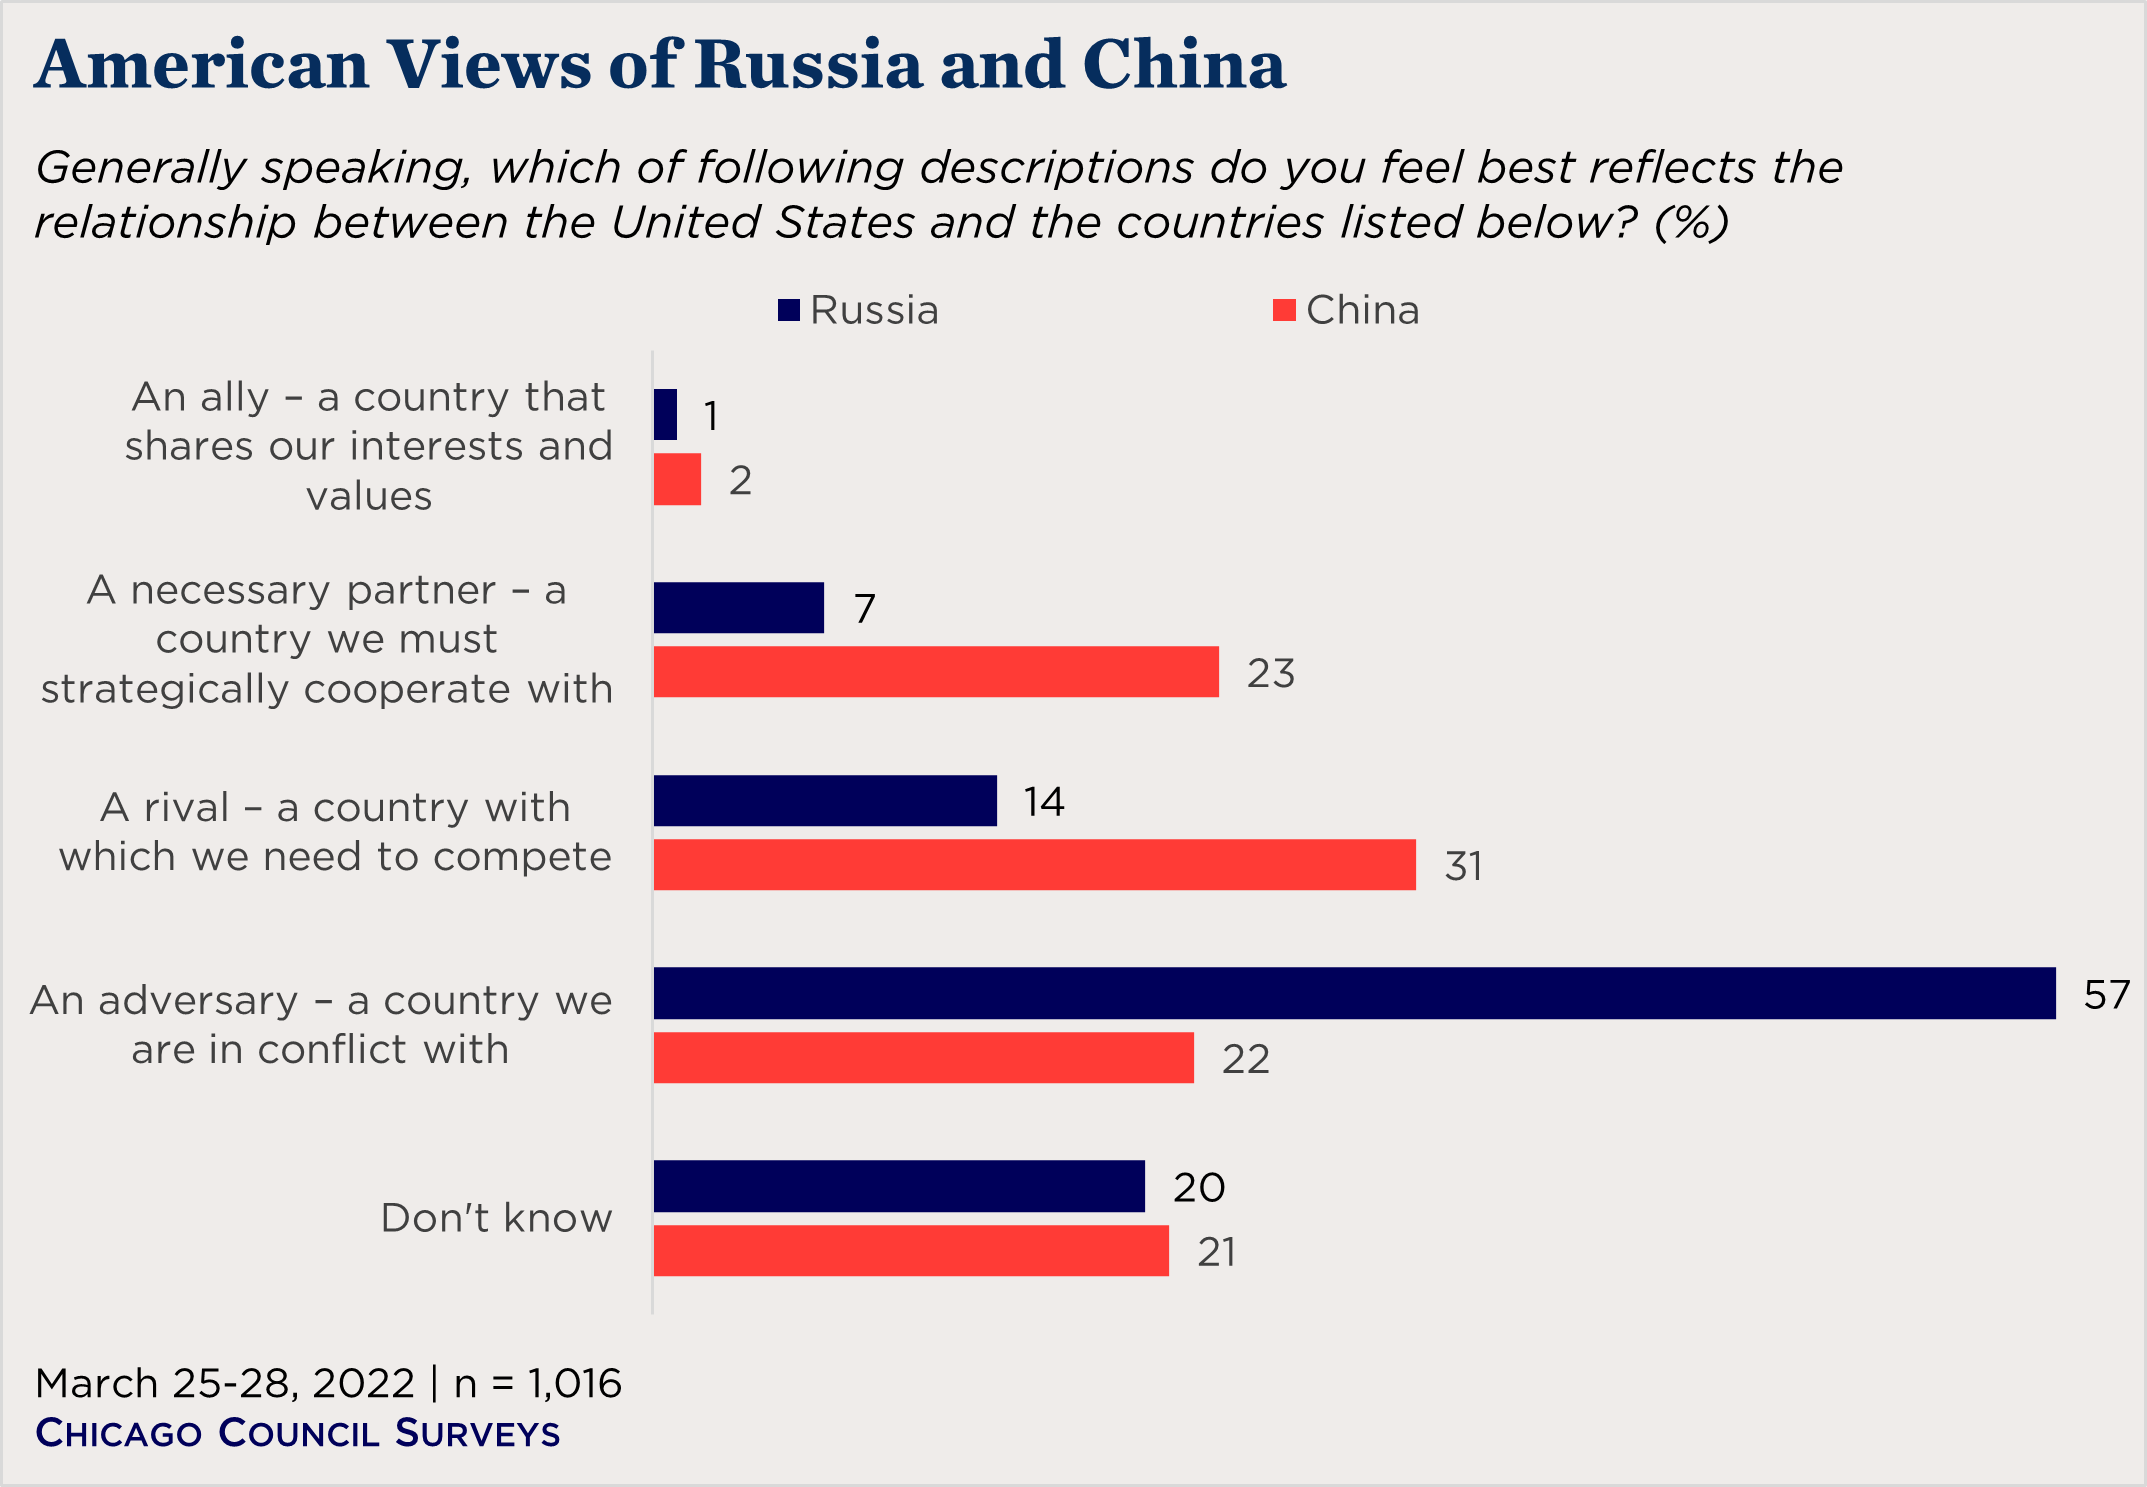 "bar chart showing how Americans view the US relationship with China and Russia"